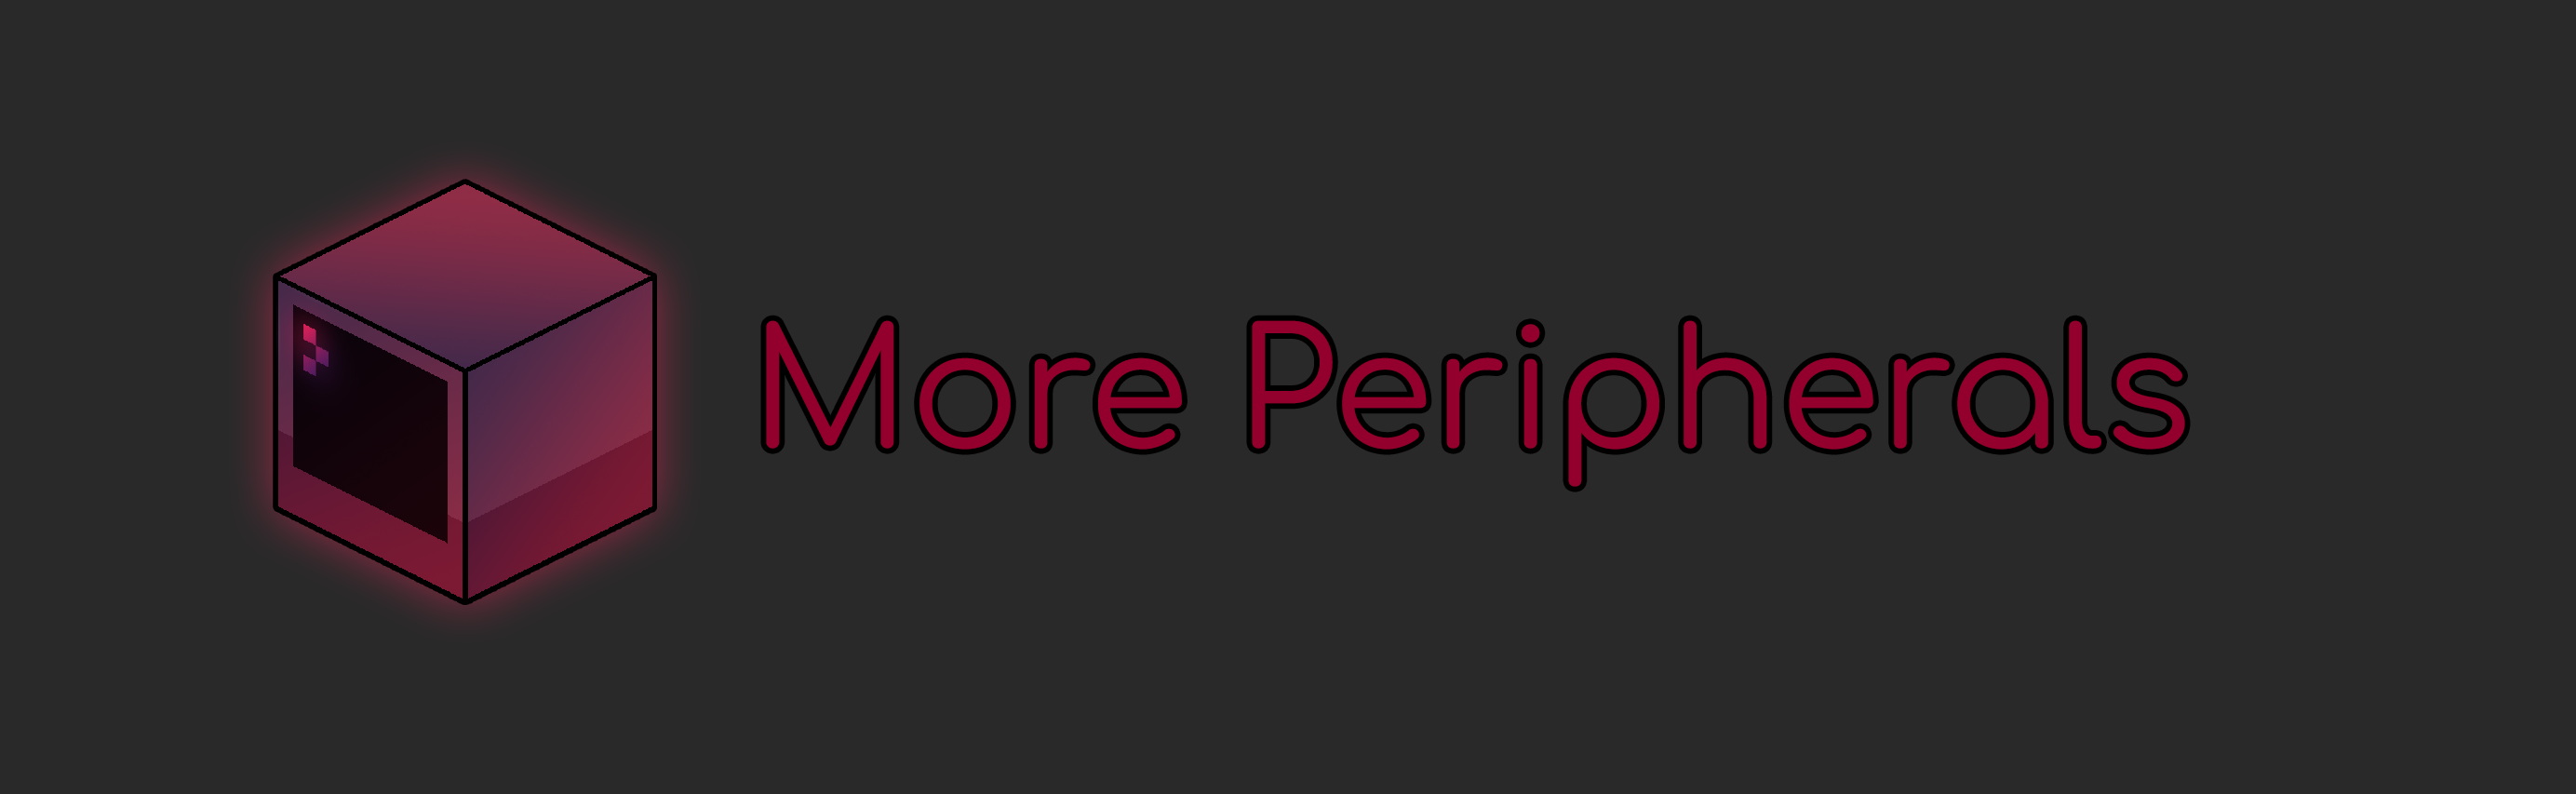 More Peripherals Banner